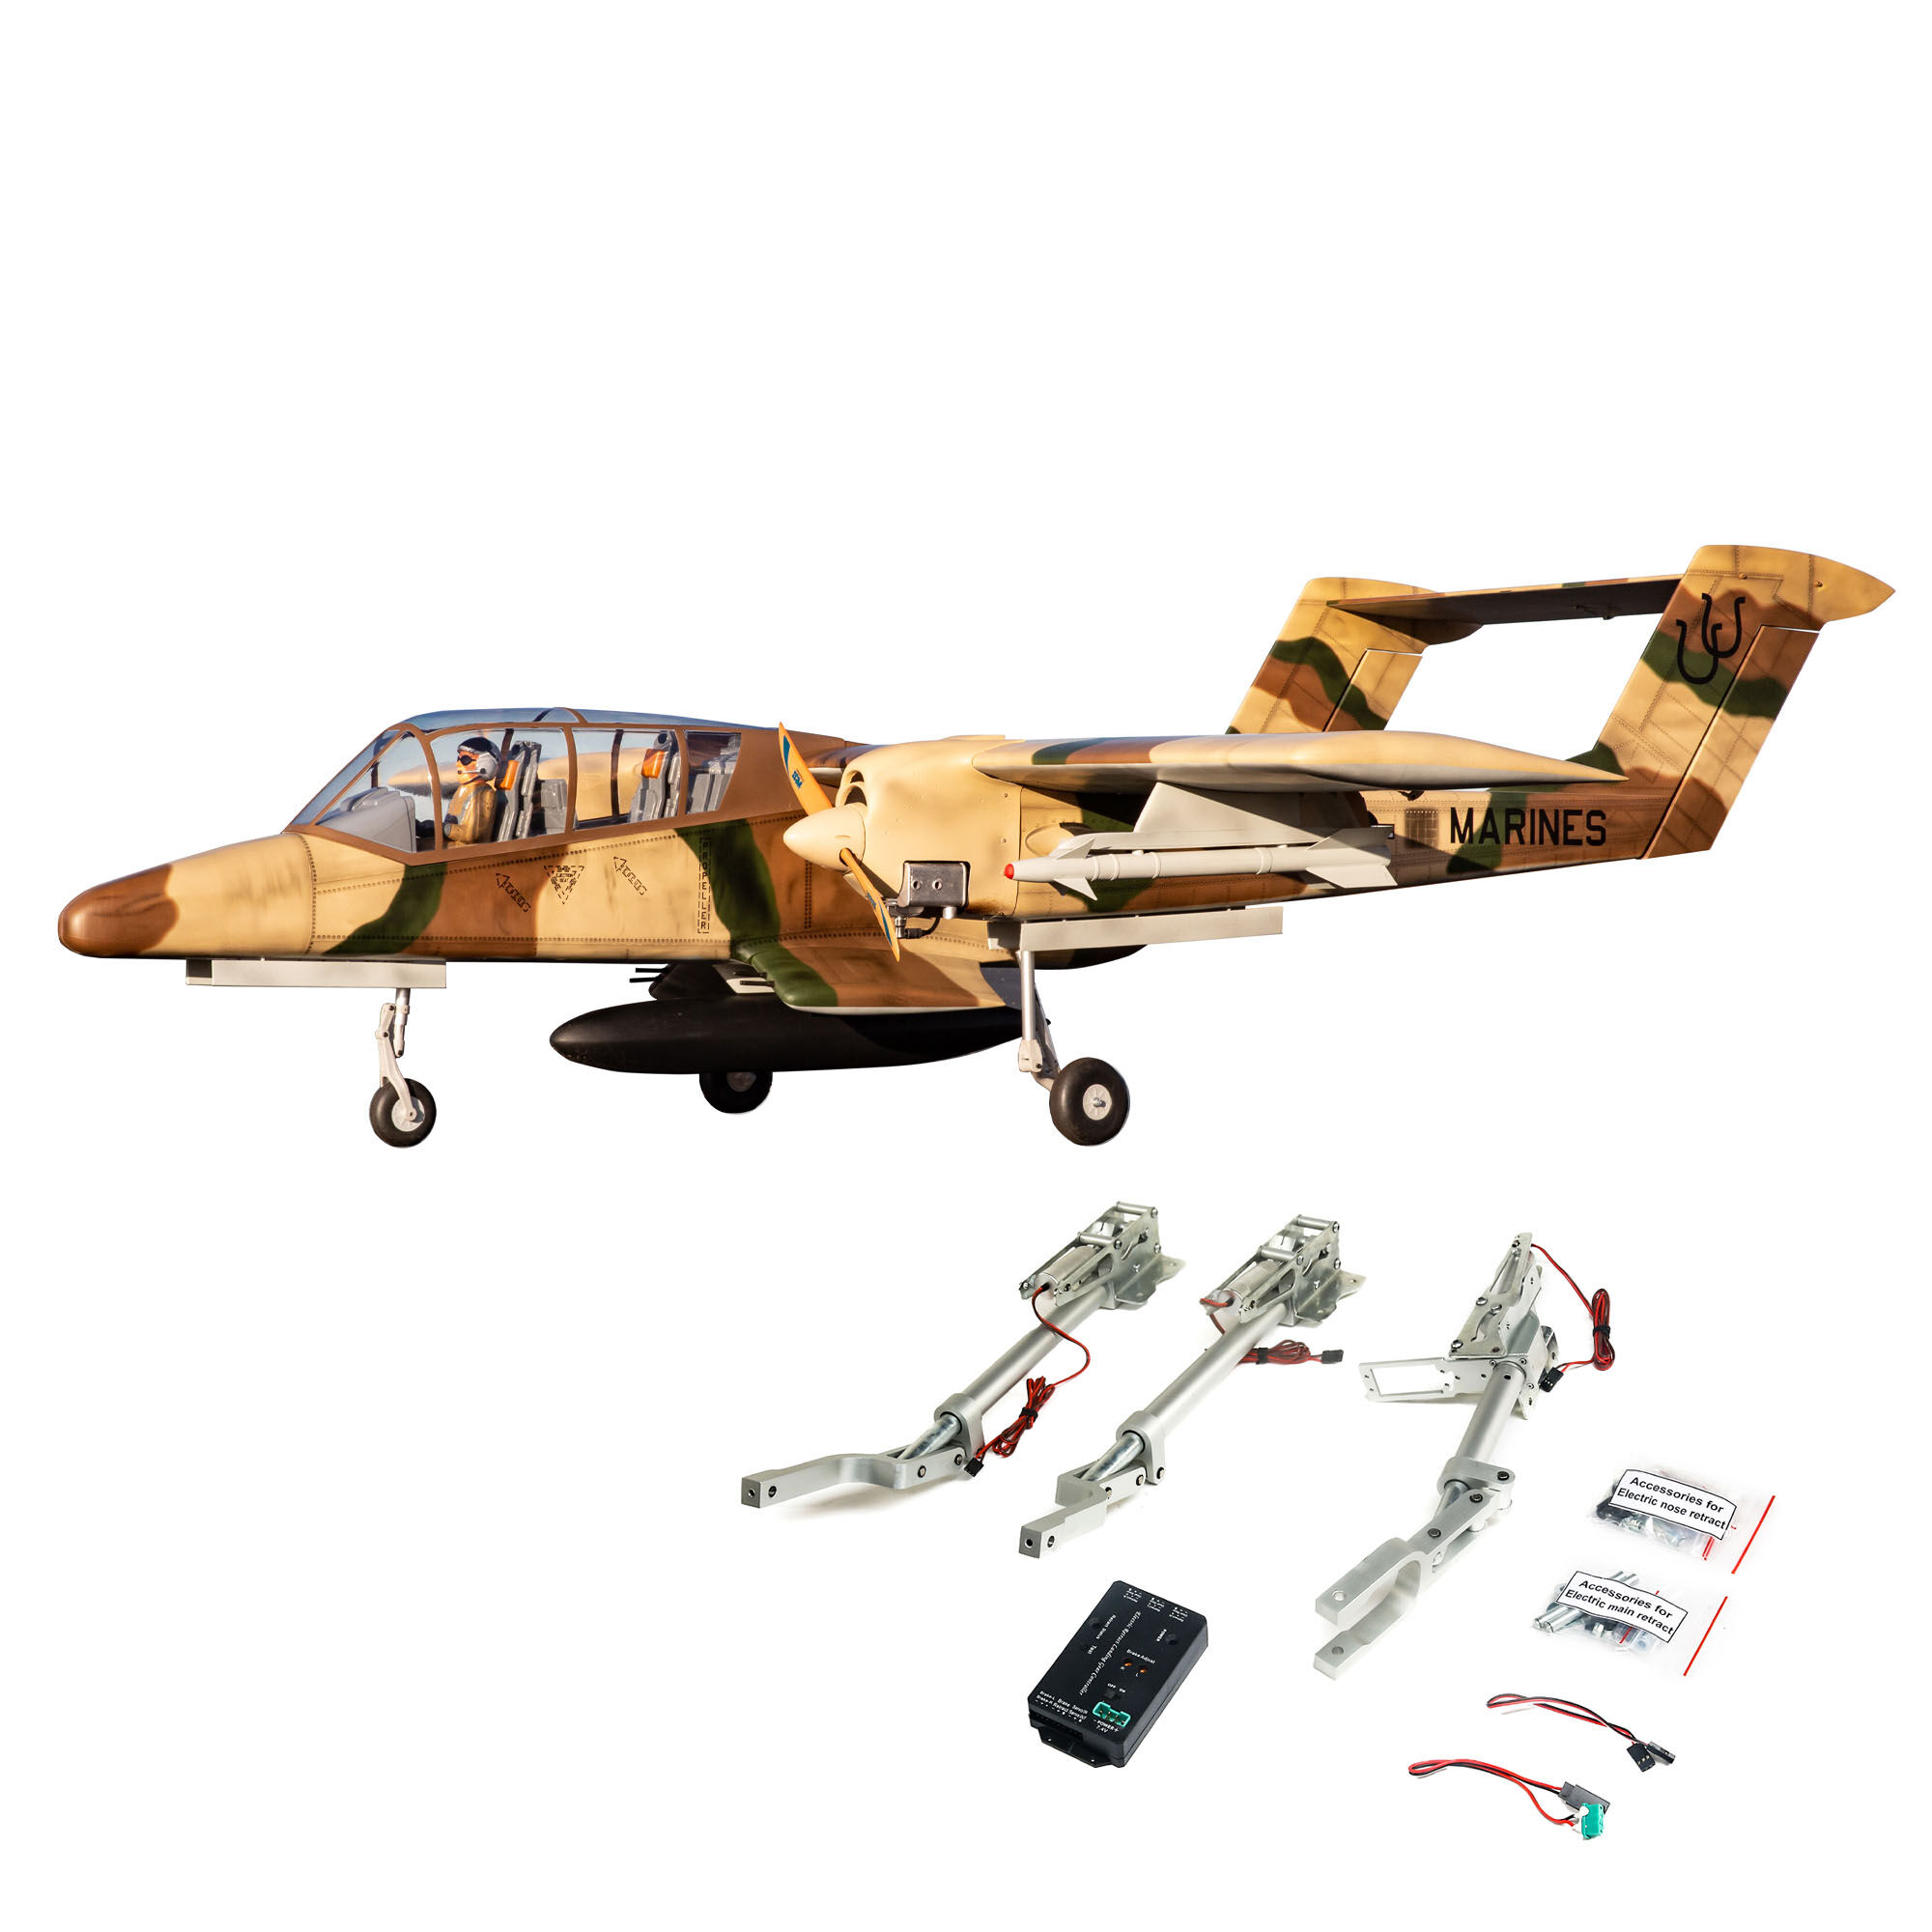 giant scale rc planes arf